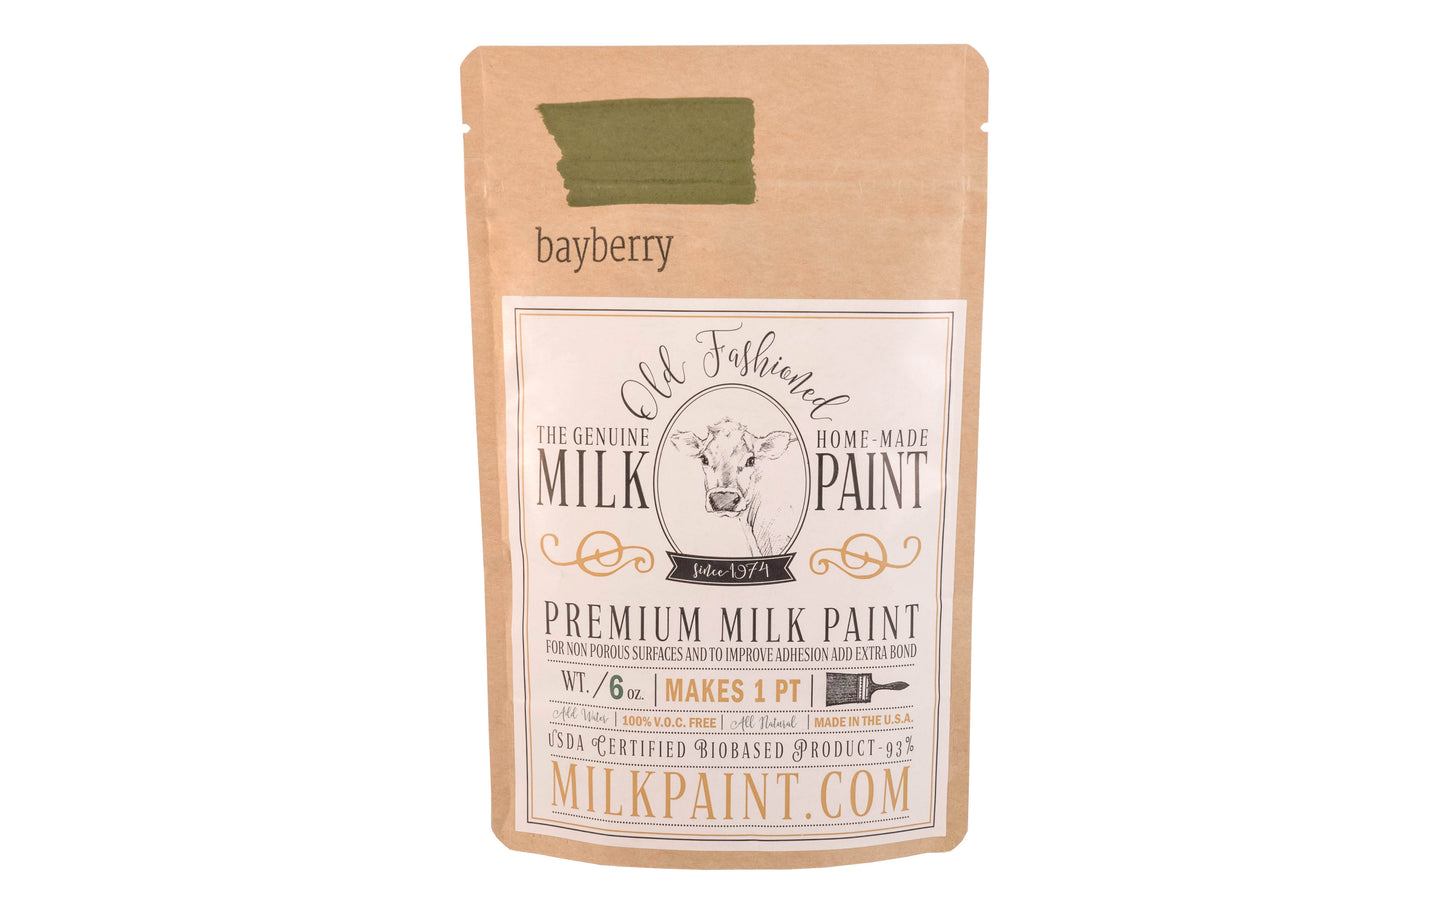 This Milk Paint color is "Bayberry" - Olive green with yellow undertones. Comes in a powder form, you can control how thick/thin you mix the paint. Use it as you would regular paint, thinner for a wash/stain or thicker to create texture. Environmentally safe, non-toxic & is food safe. 100% VOC free. Powder Paint